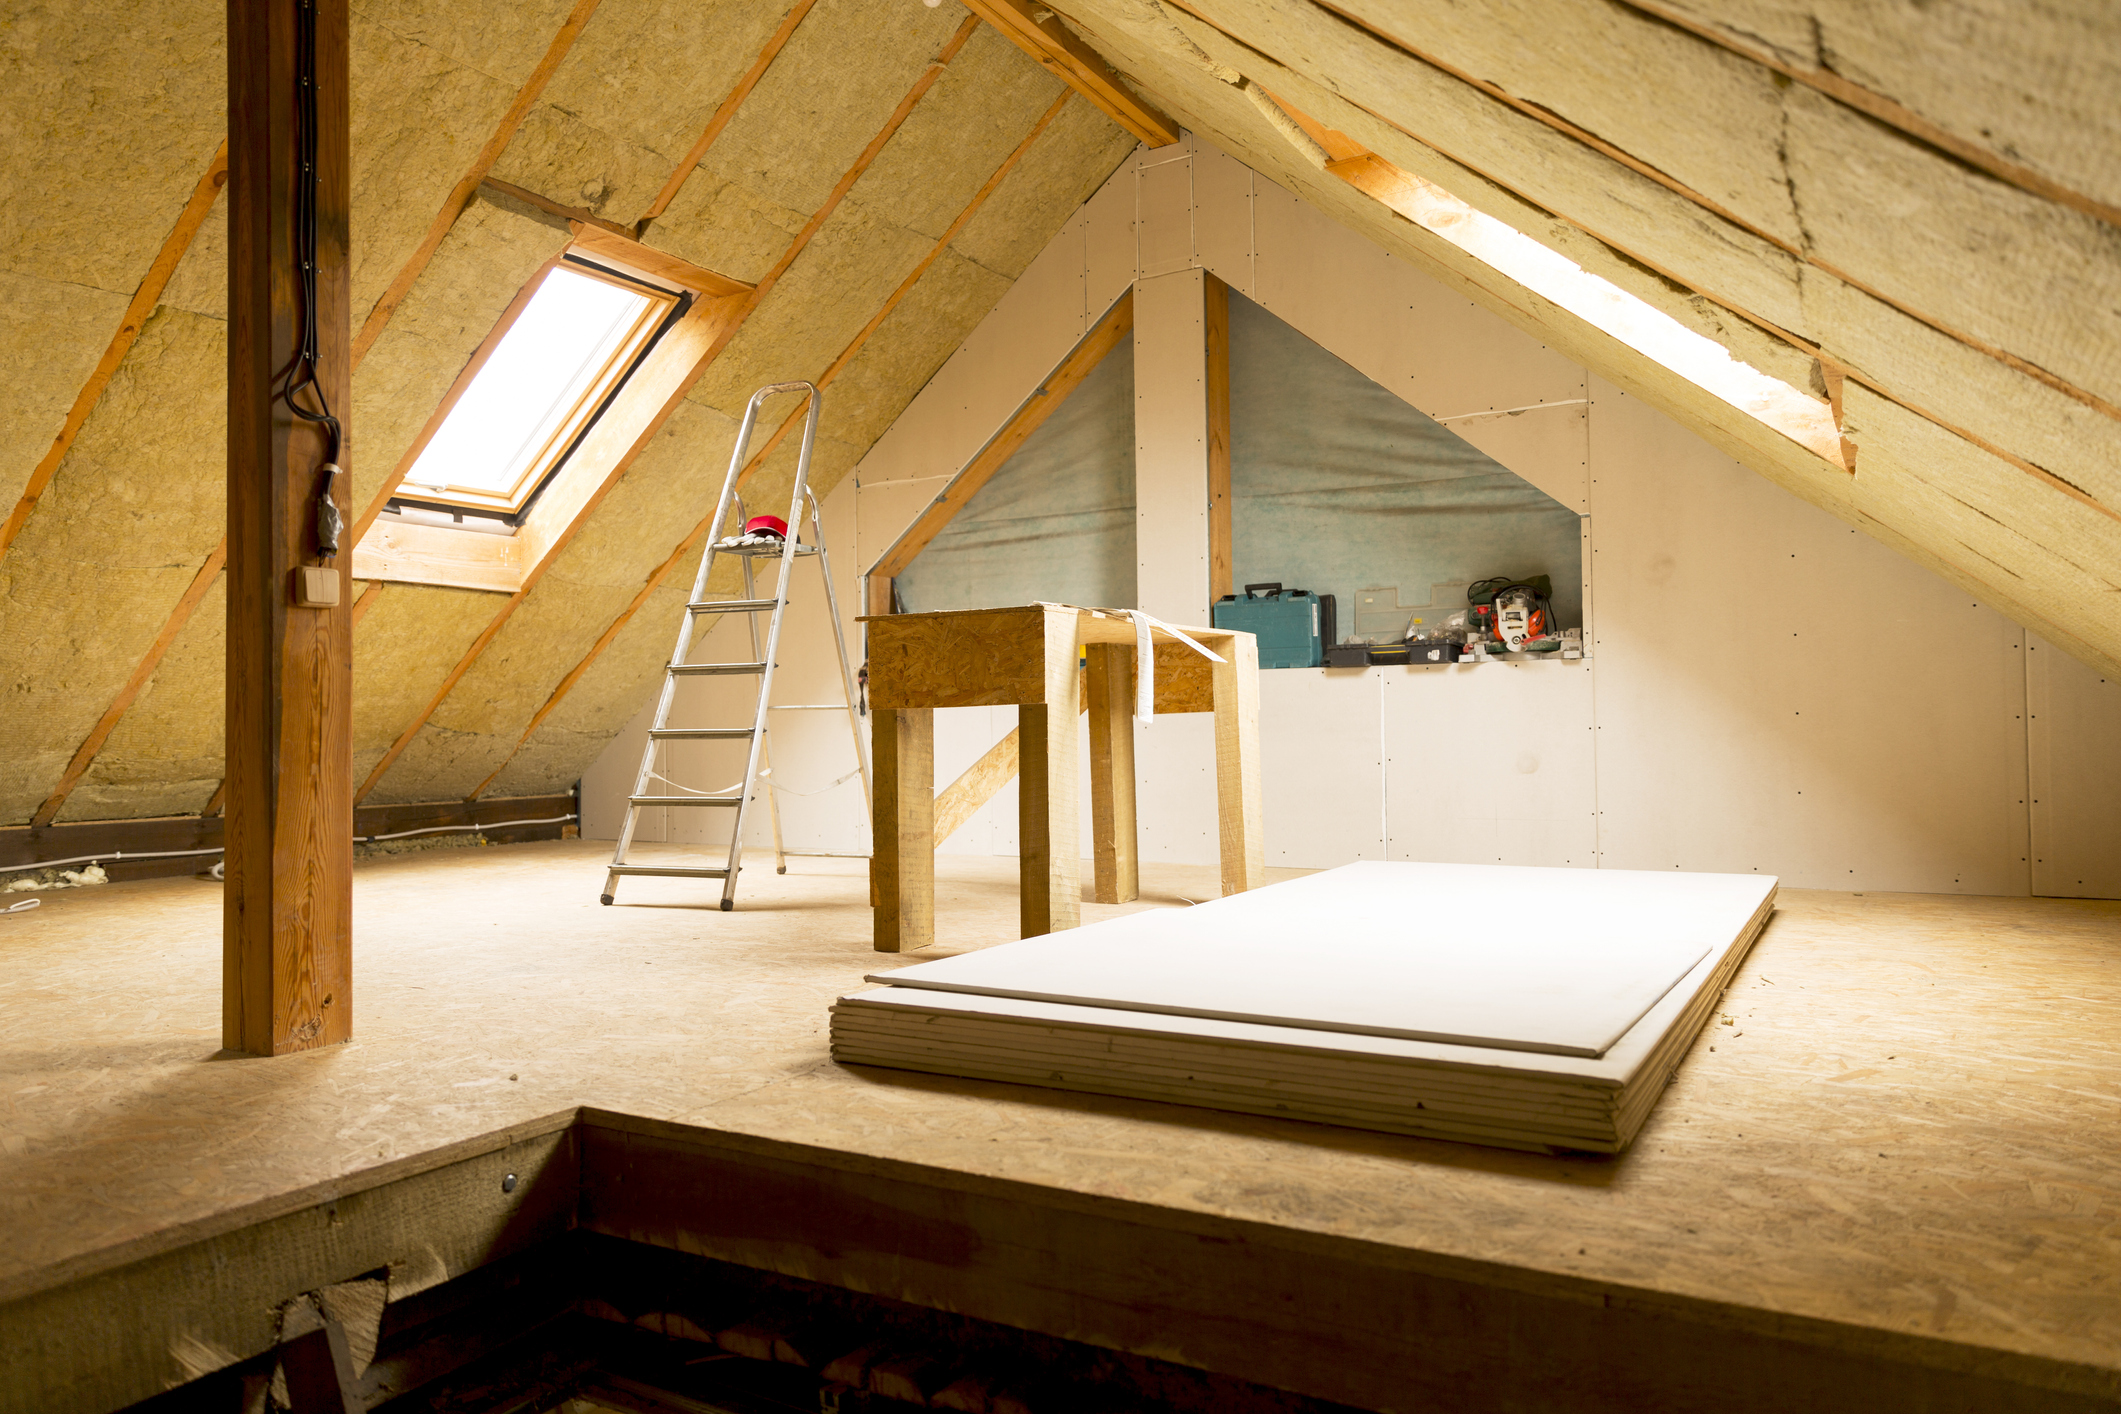 Overhead Comfort: Choosing the Right Attic Insulation for Your Space